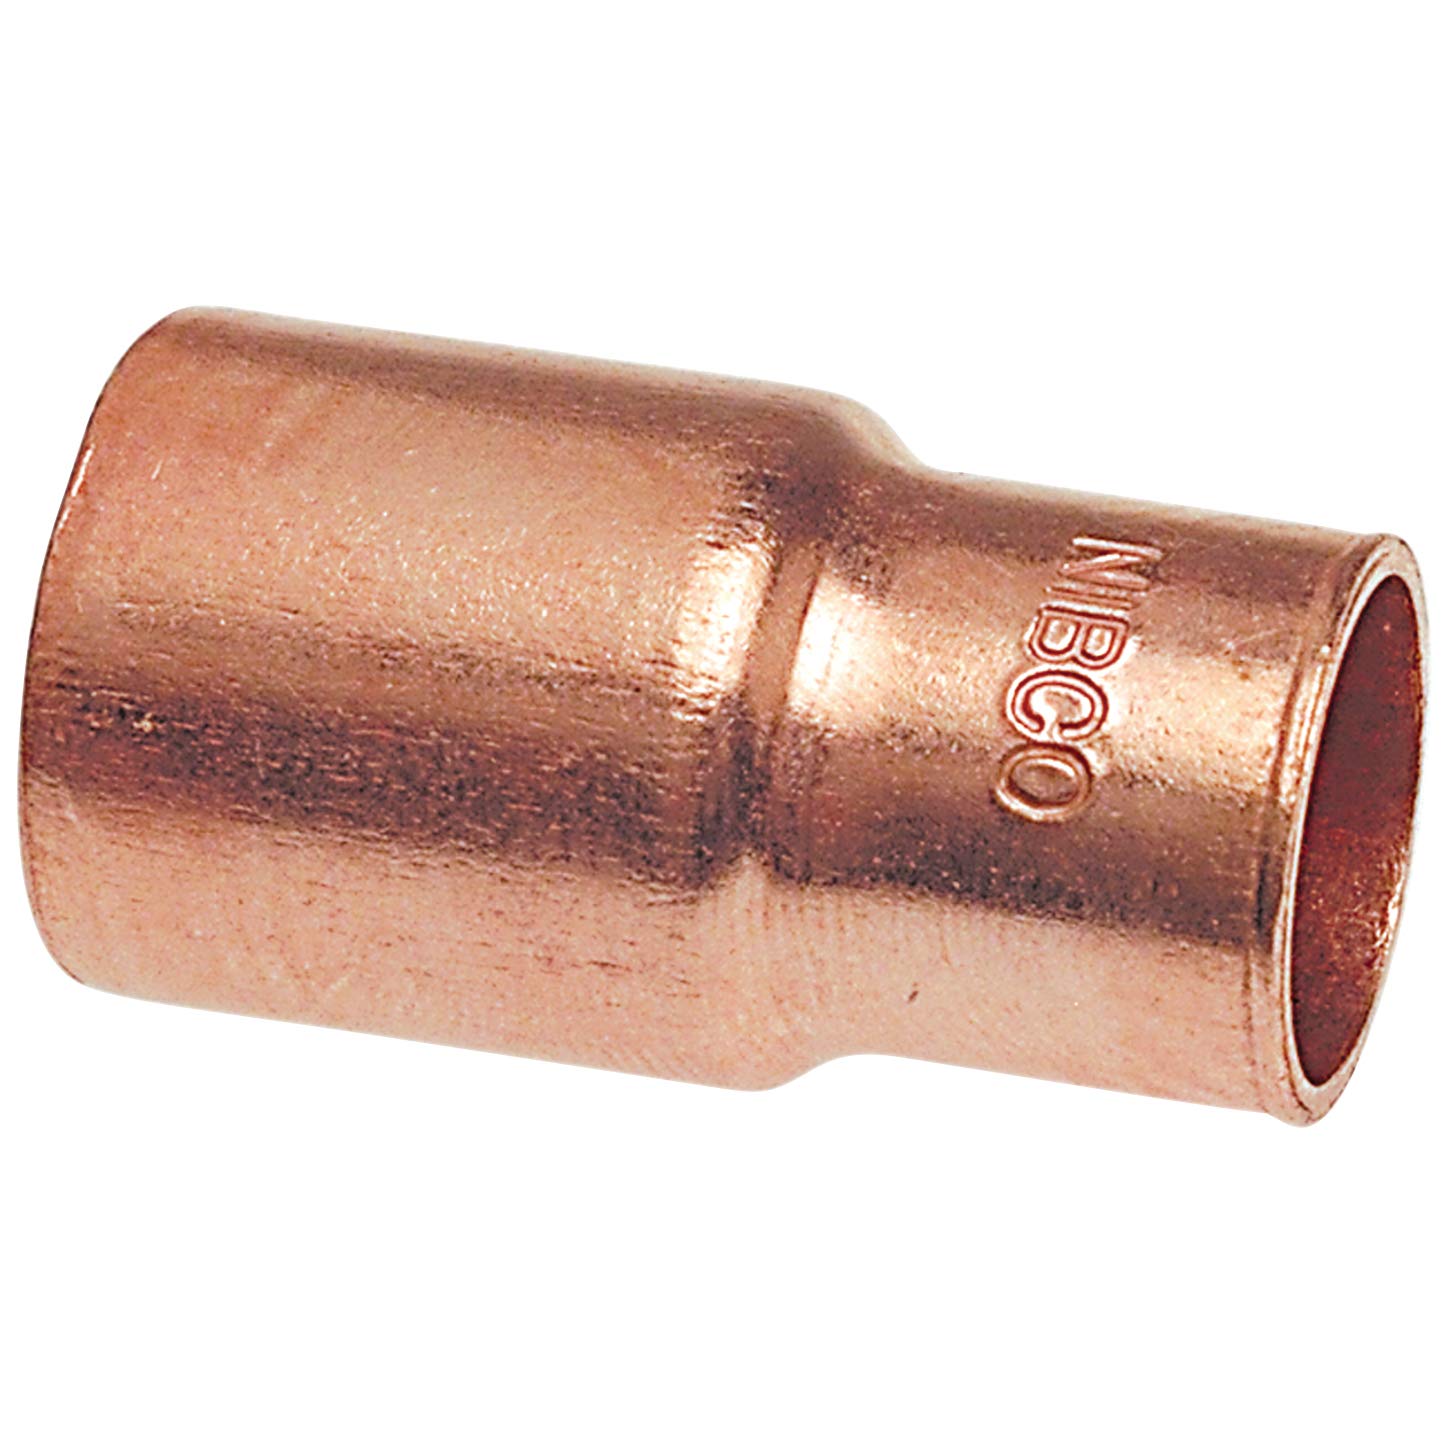 2" x1 1/4" Fitting Reducer Ftg x C - Wrot Copper, 600-2